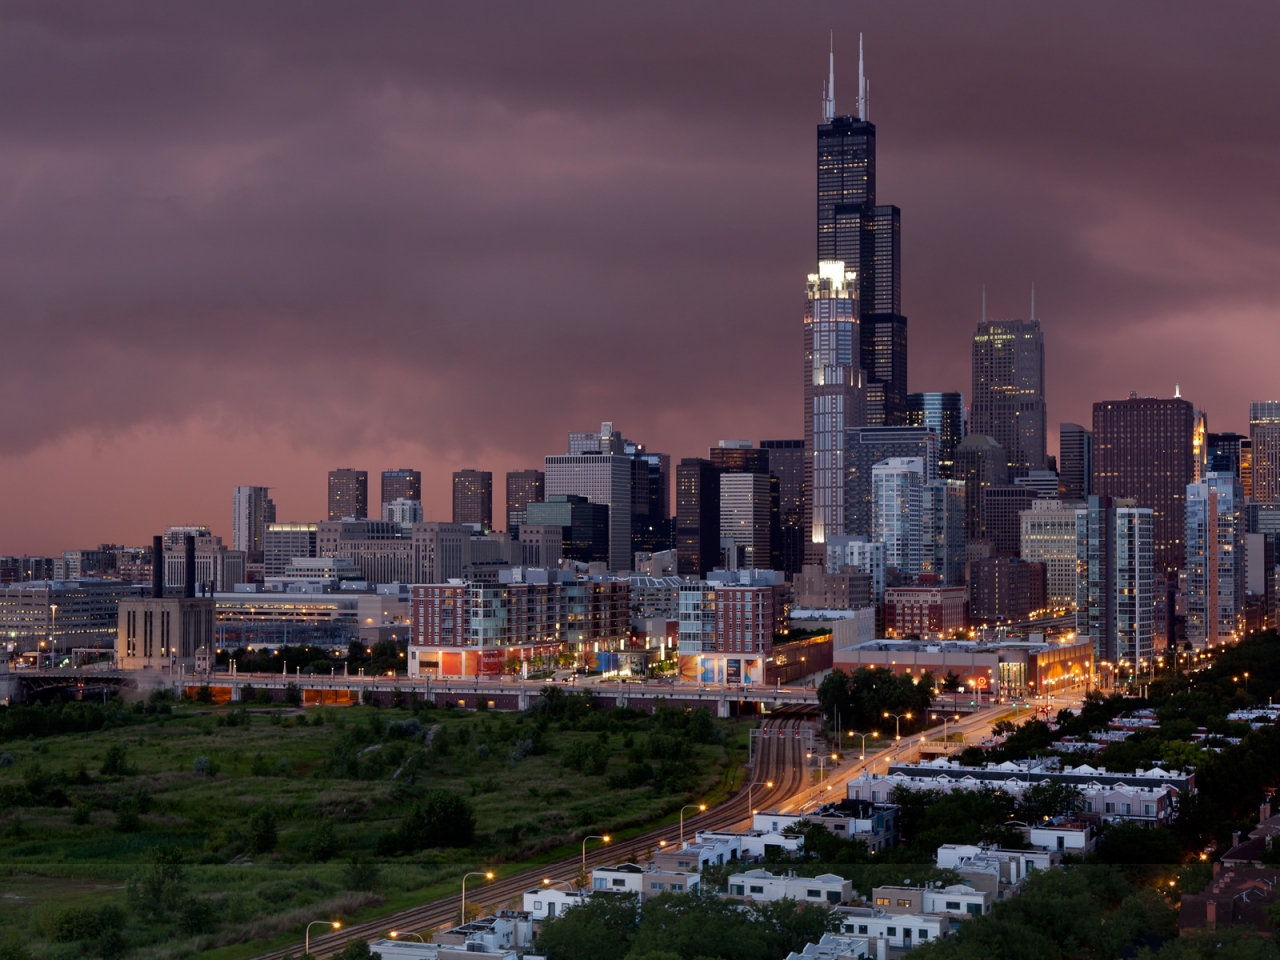 Sunset and Storm in Chicago for 1280 x 960 resolution